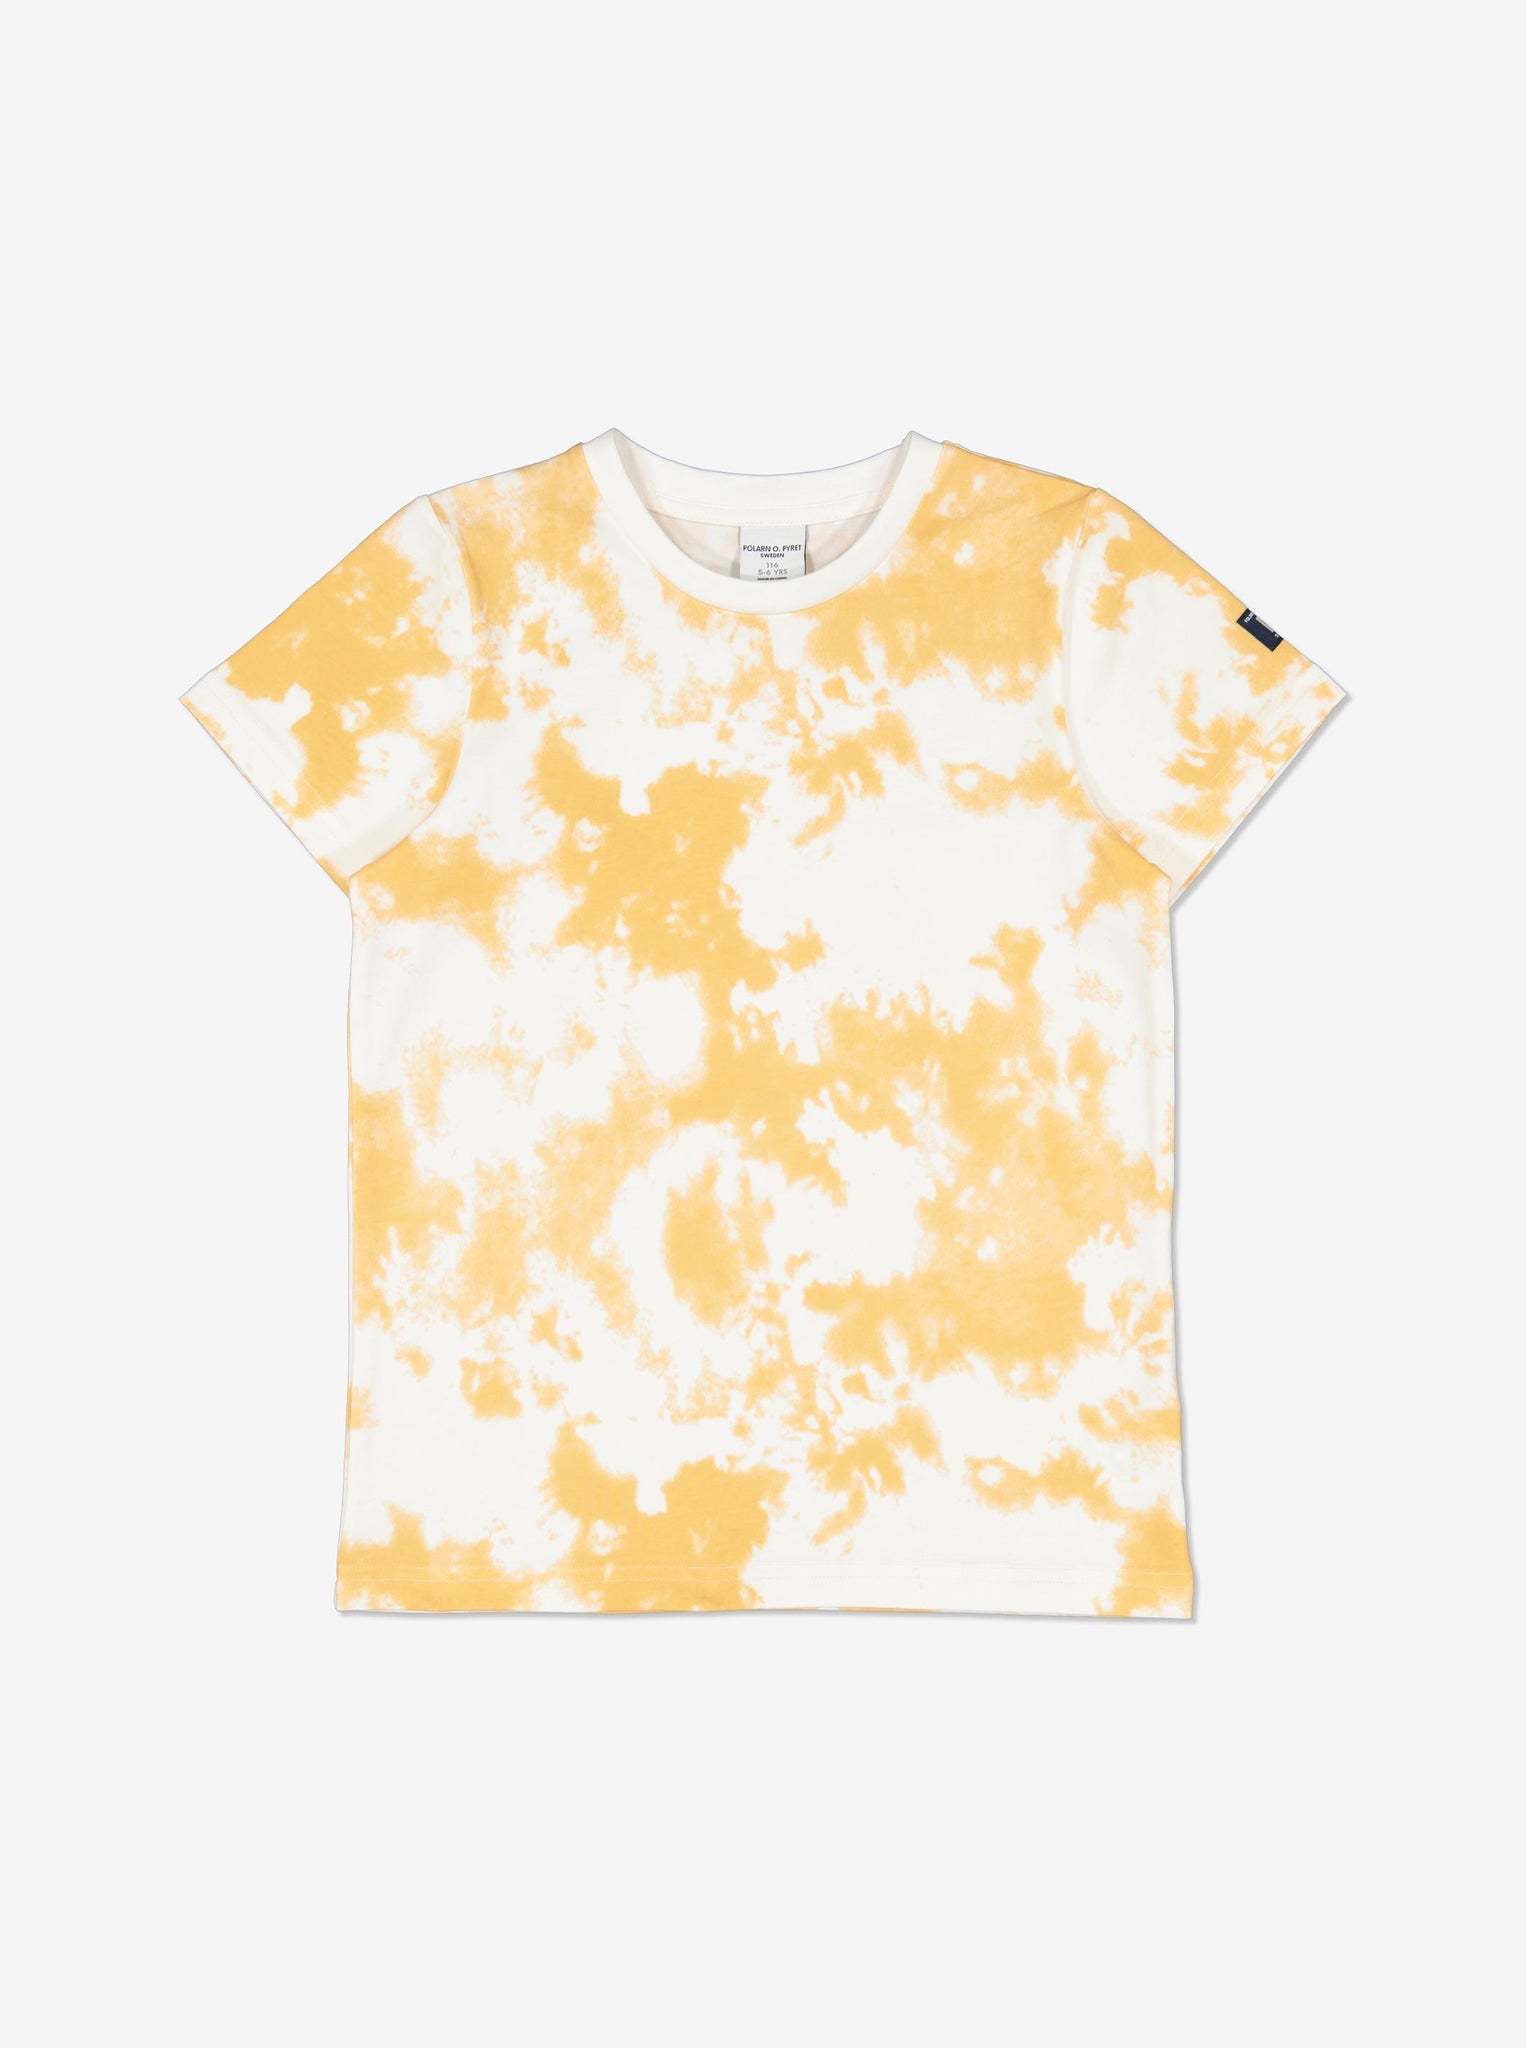 Tie-Dye Yellow Kids T-Shirt from Polarn O. Pyret Kidswear. Ethically made and sustainably sourced materials.